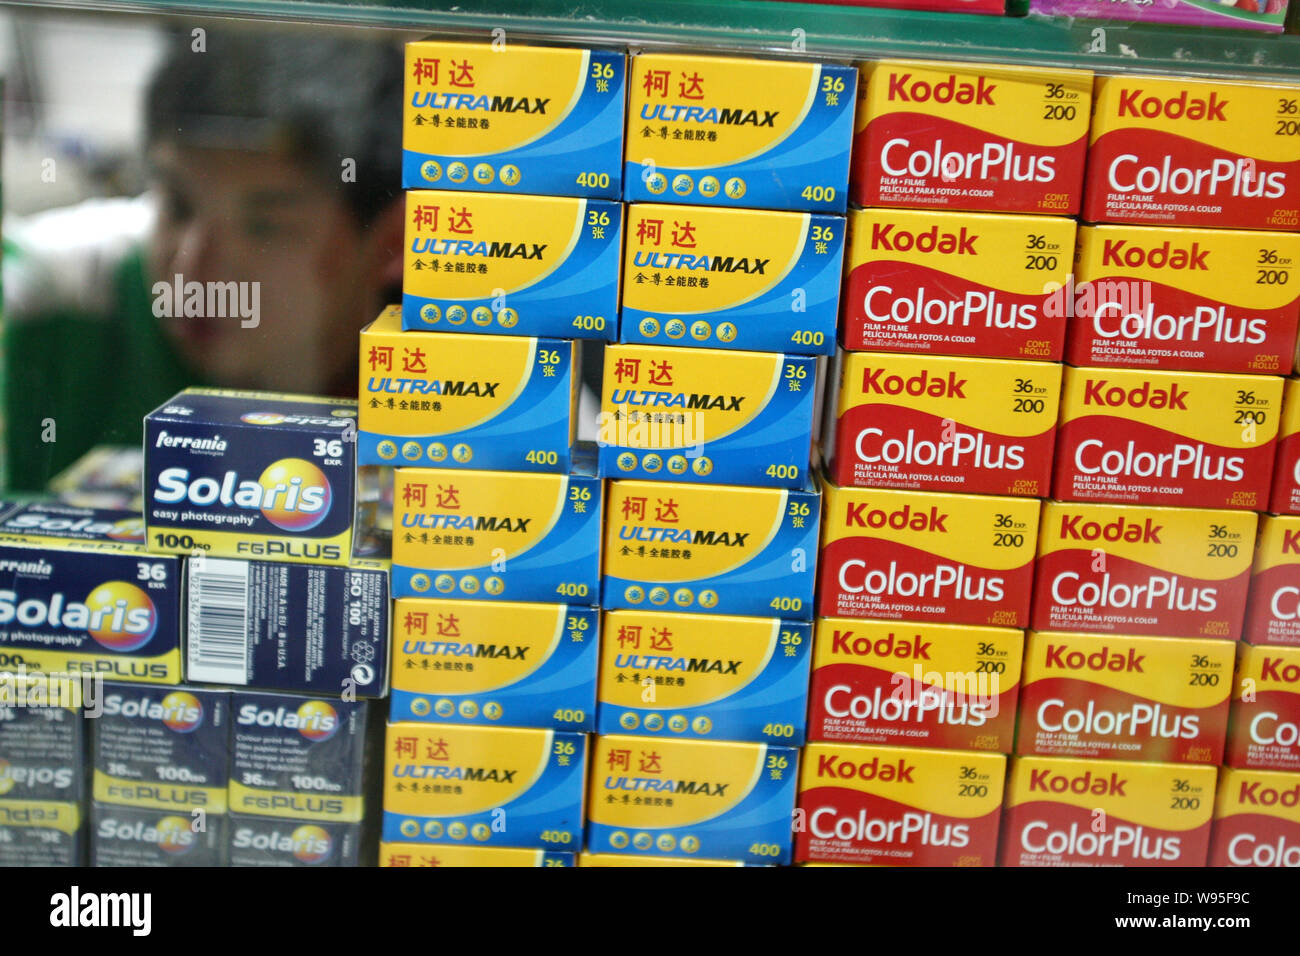 Boxes of Kodak films are for sale at a photography equipment store in Shanghai, China, 19 January 2012.   Eastman Kodak Co filed for bankruptcy protec Stock Photo